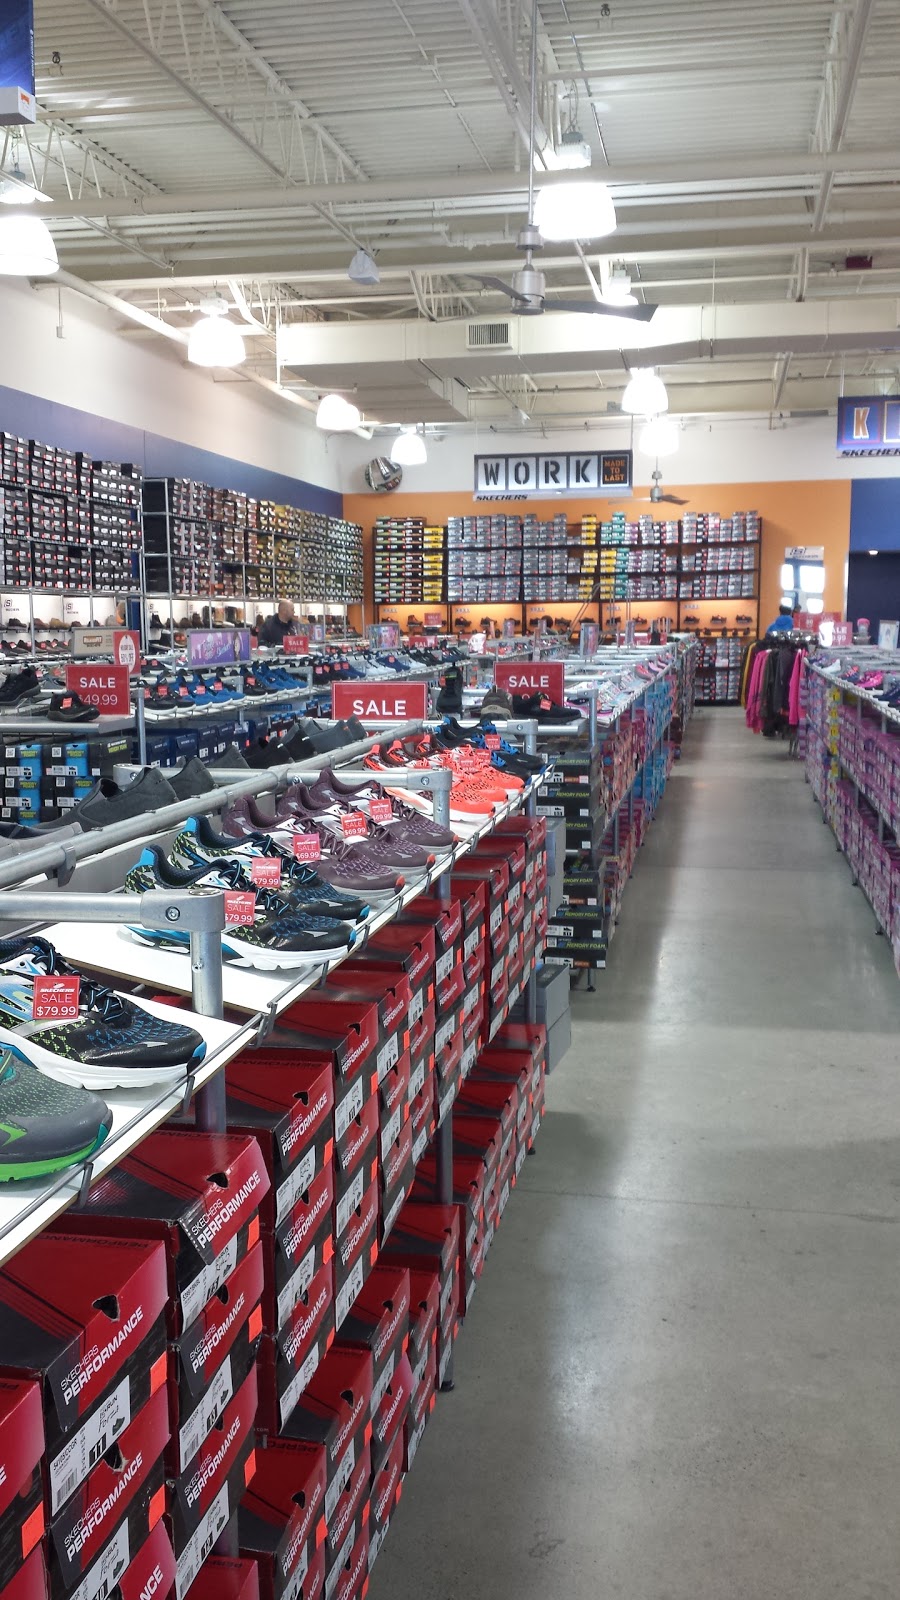 skechers outlet calgary